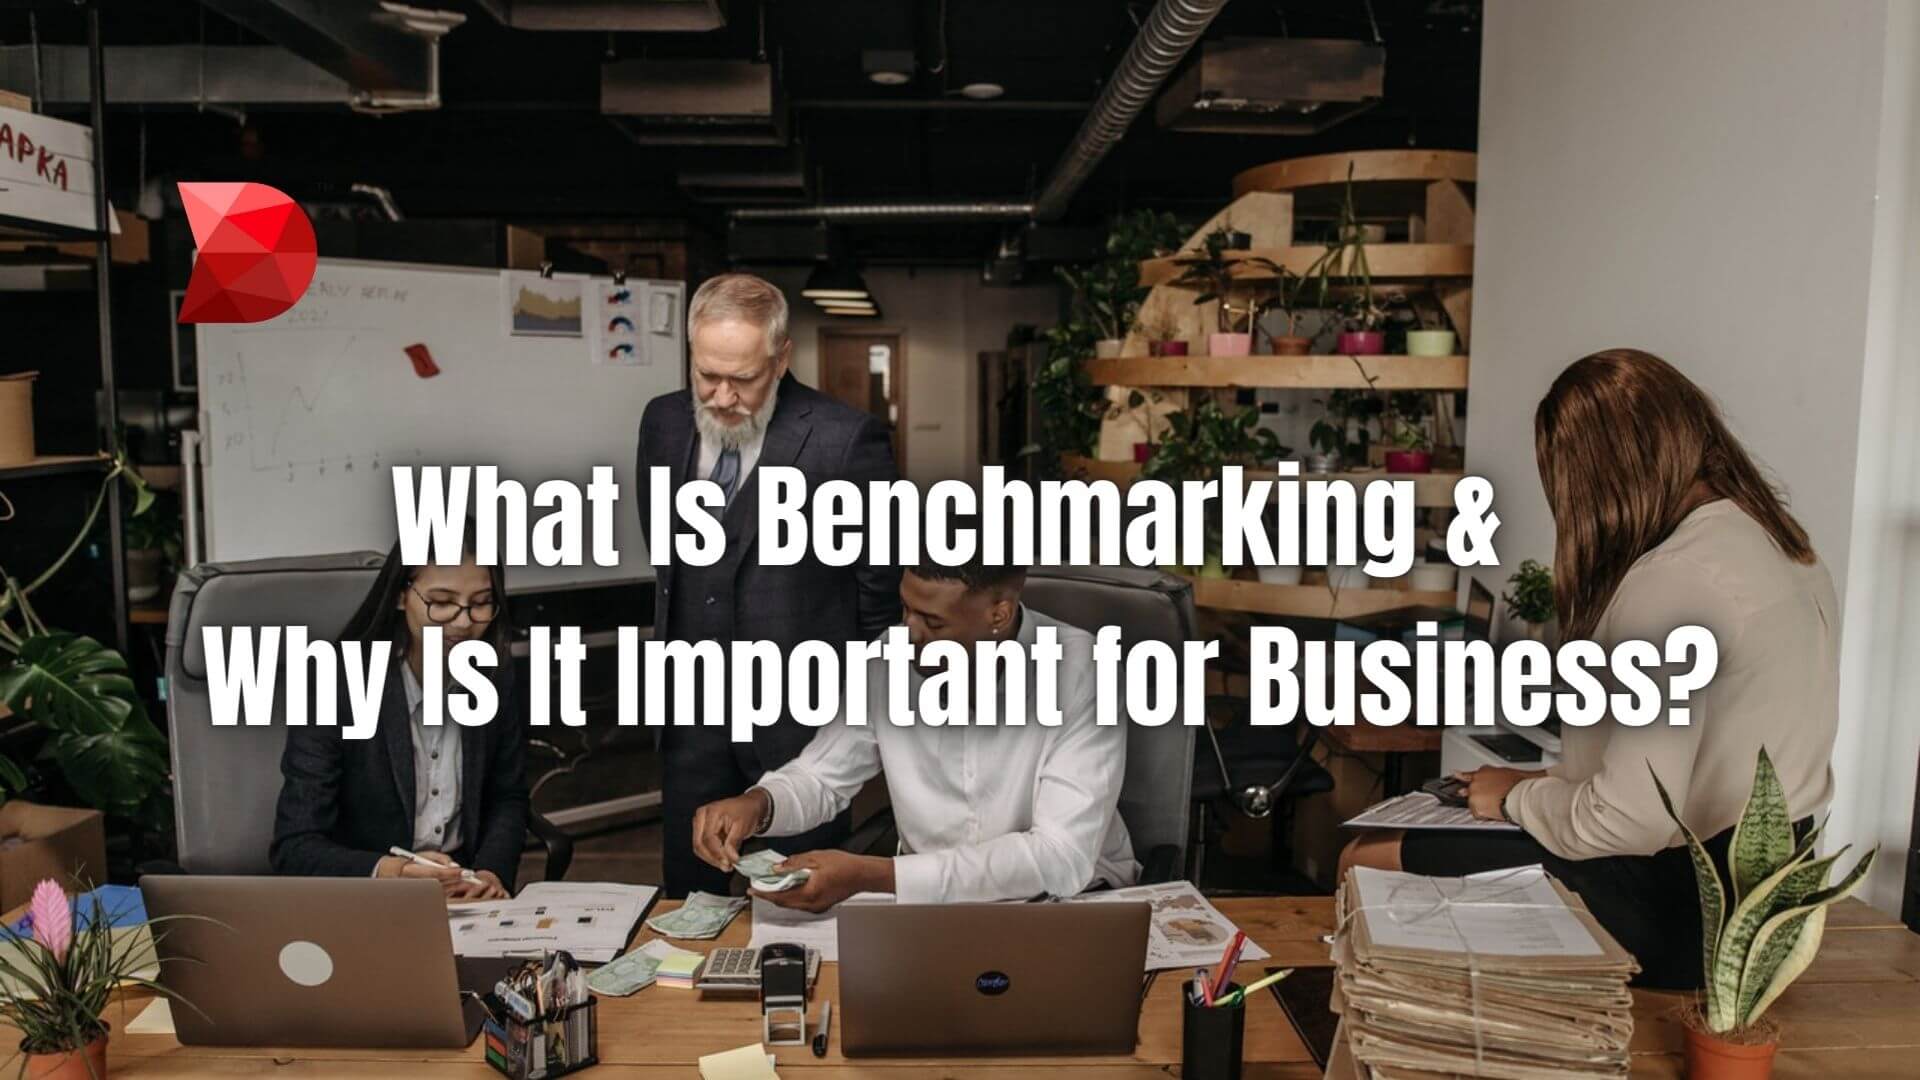 What Is Benchmarking & Why Is It Important for Business